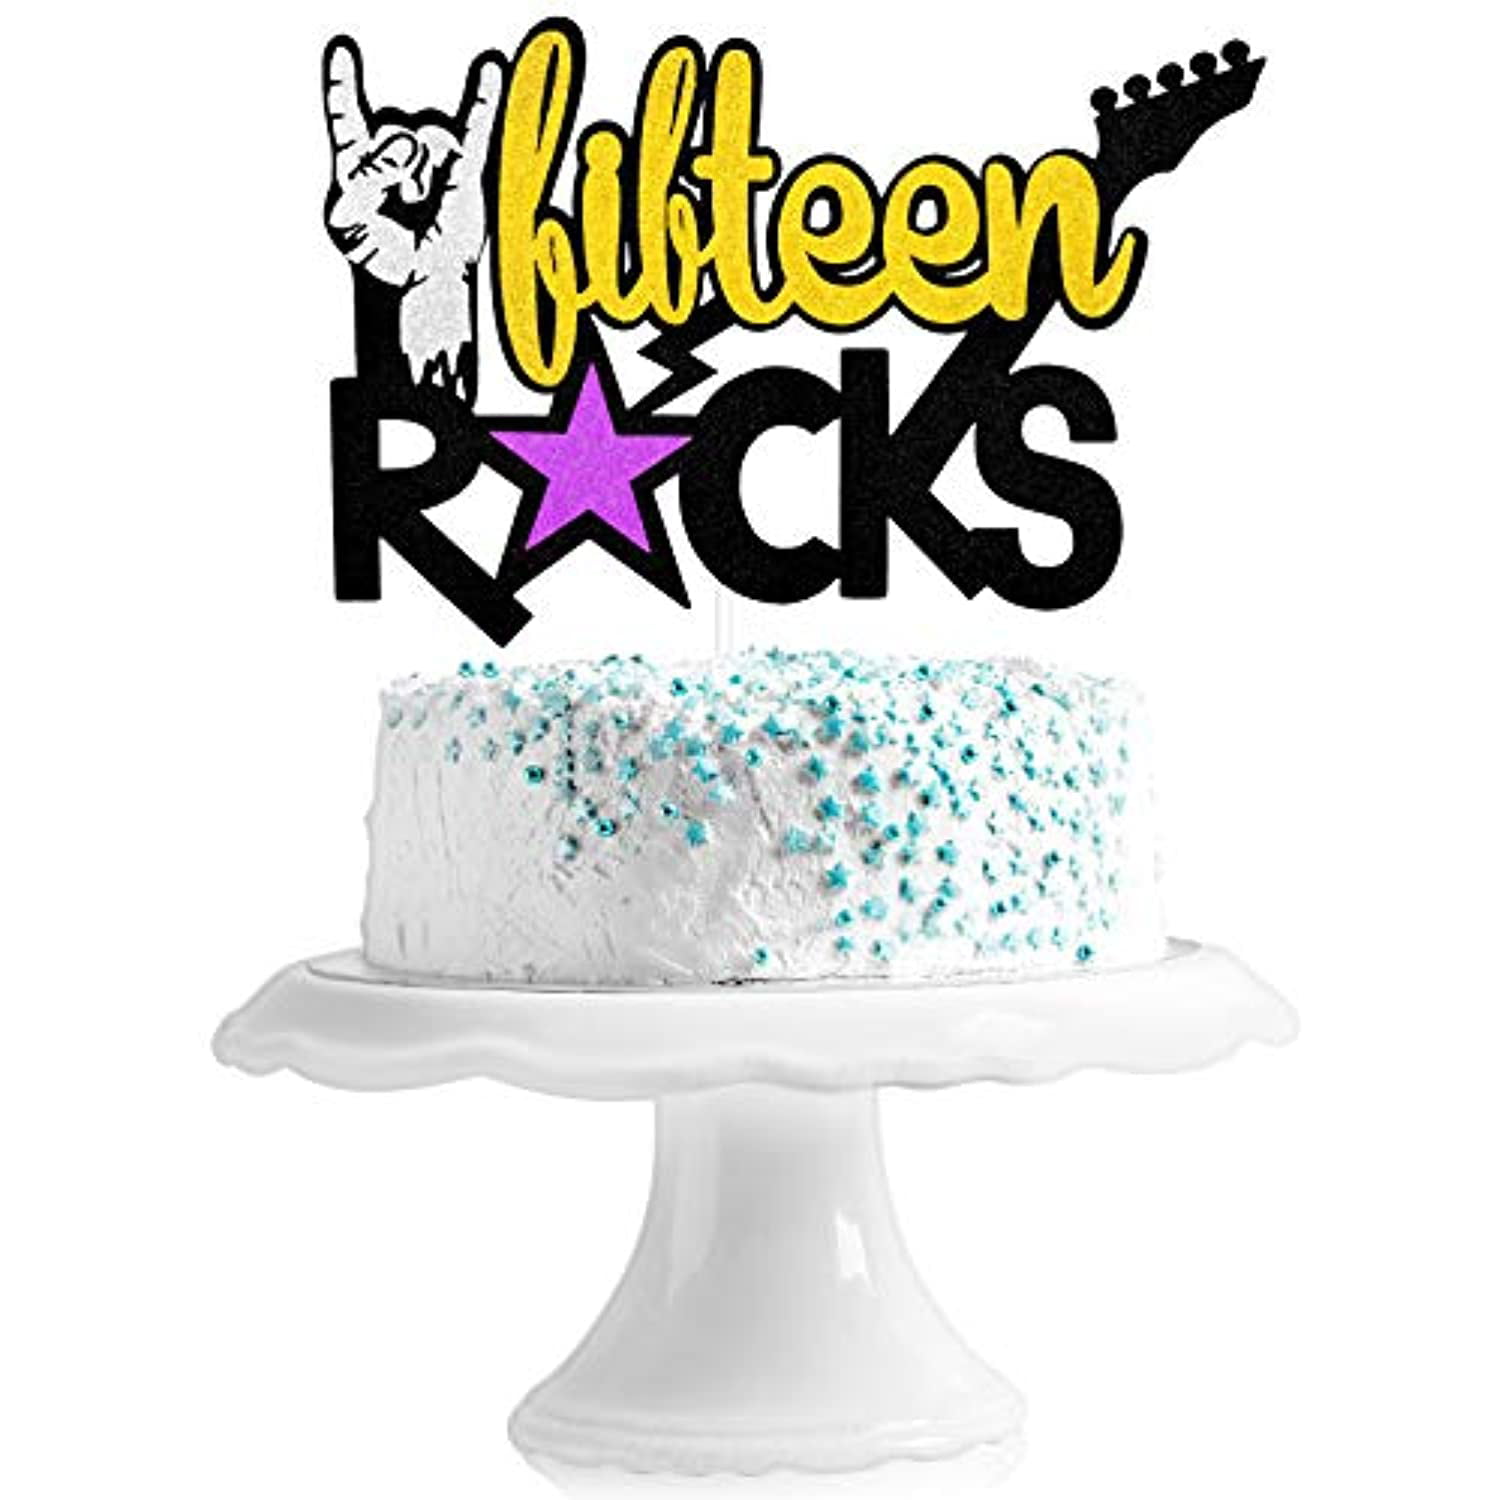 Guitar Love Rocks  LED Lighted Wedding Cake Topper Acrylic Cake Top Personalized 